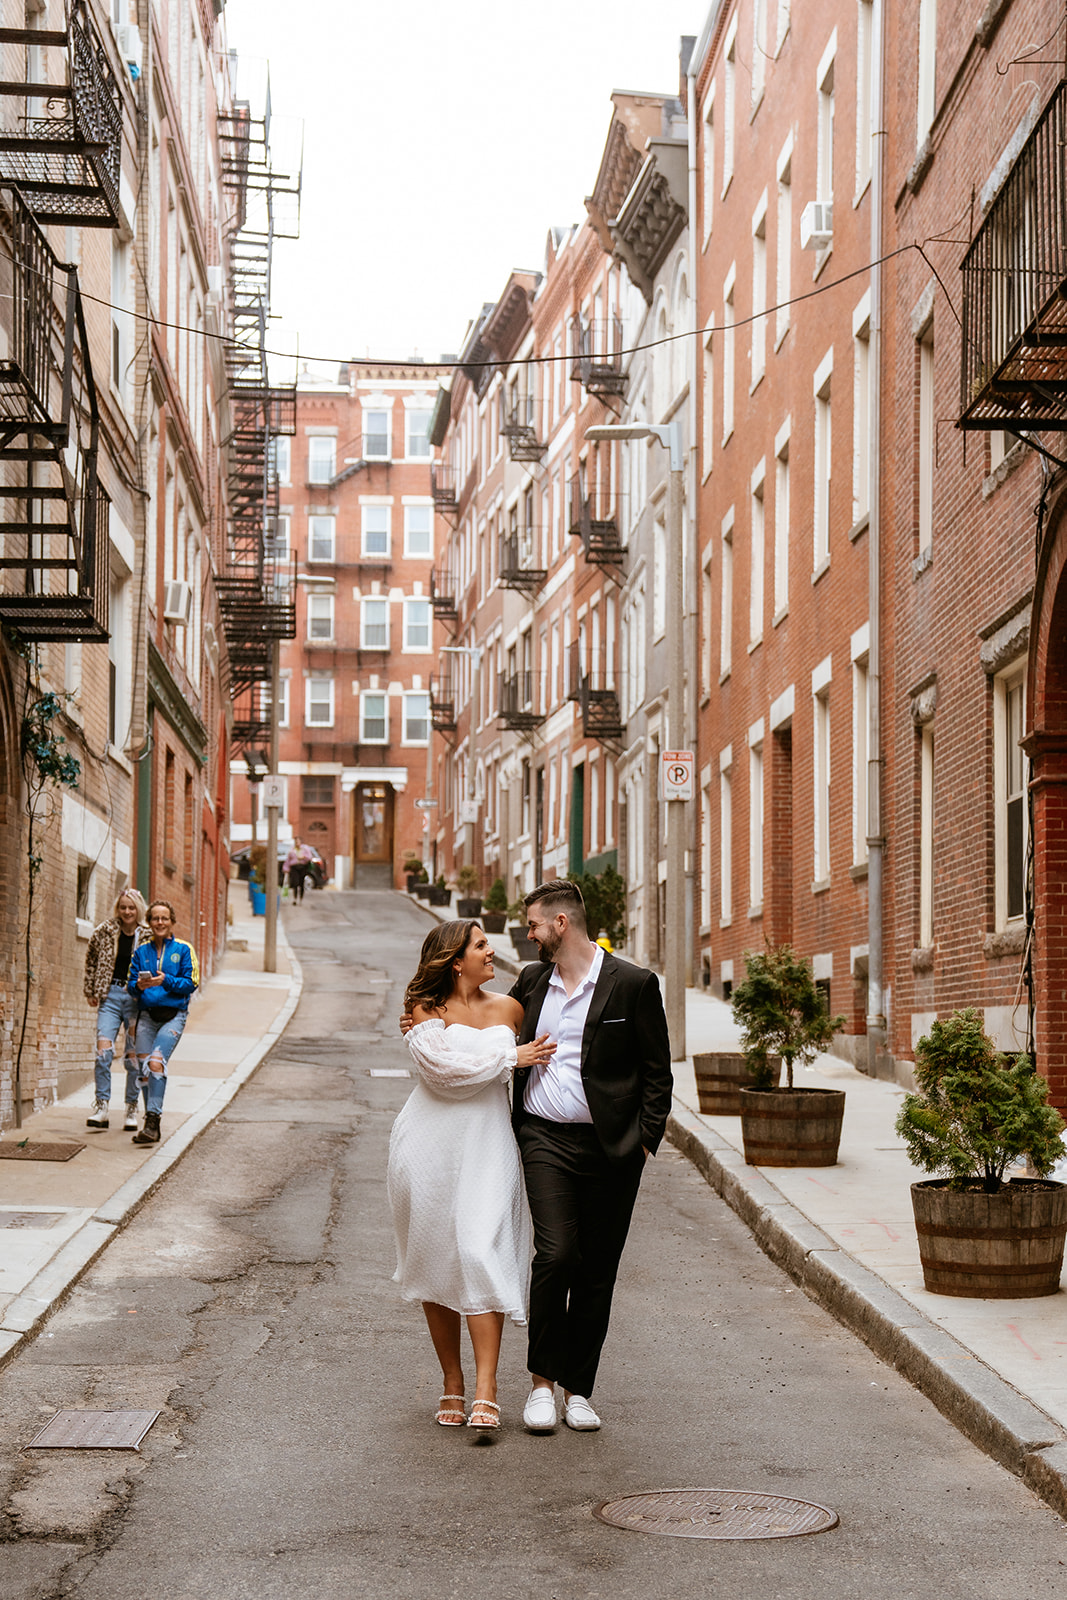 A couple embraces in a cobblestone street surrounded by red brick buildings in North End for their Engagement photos in Boston